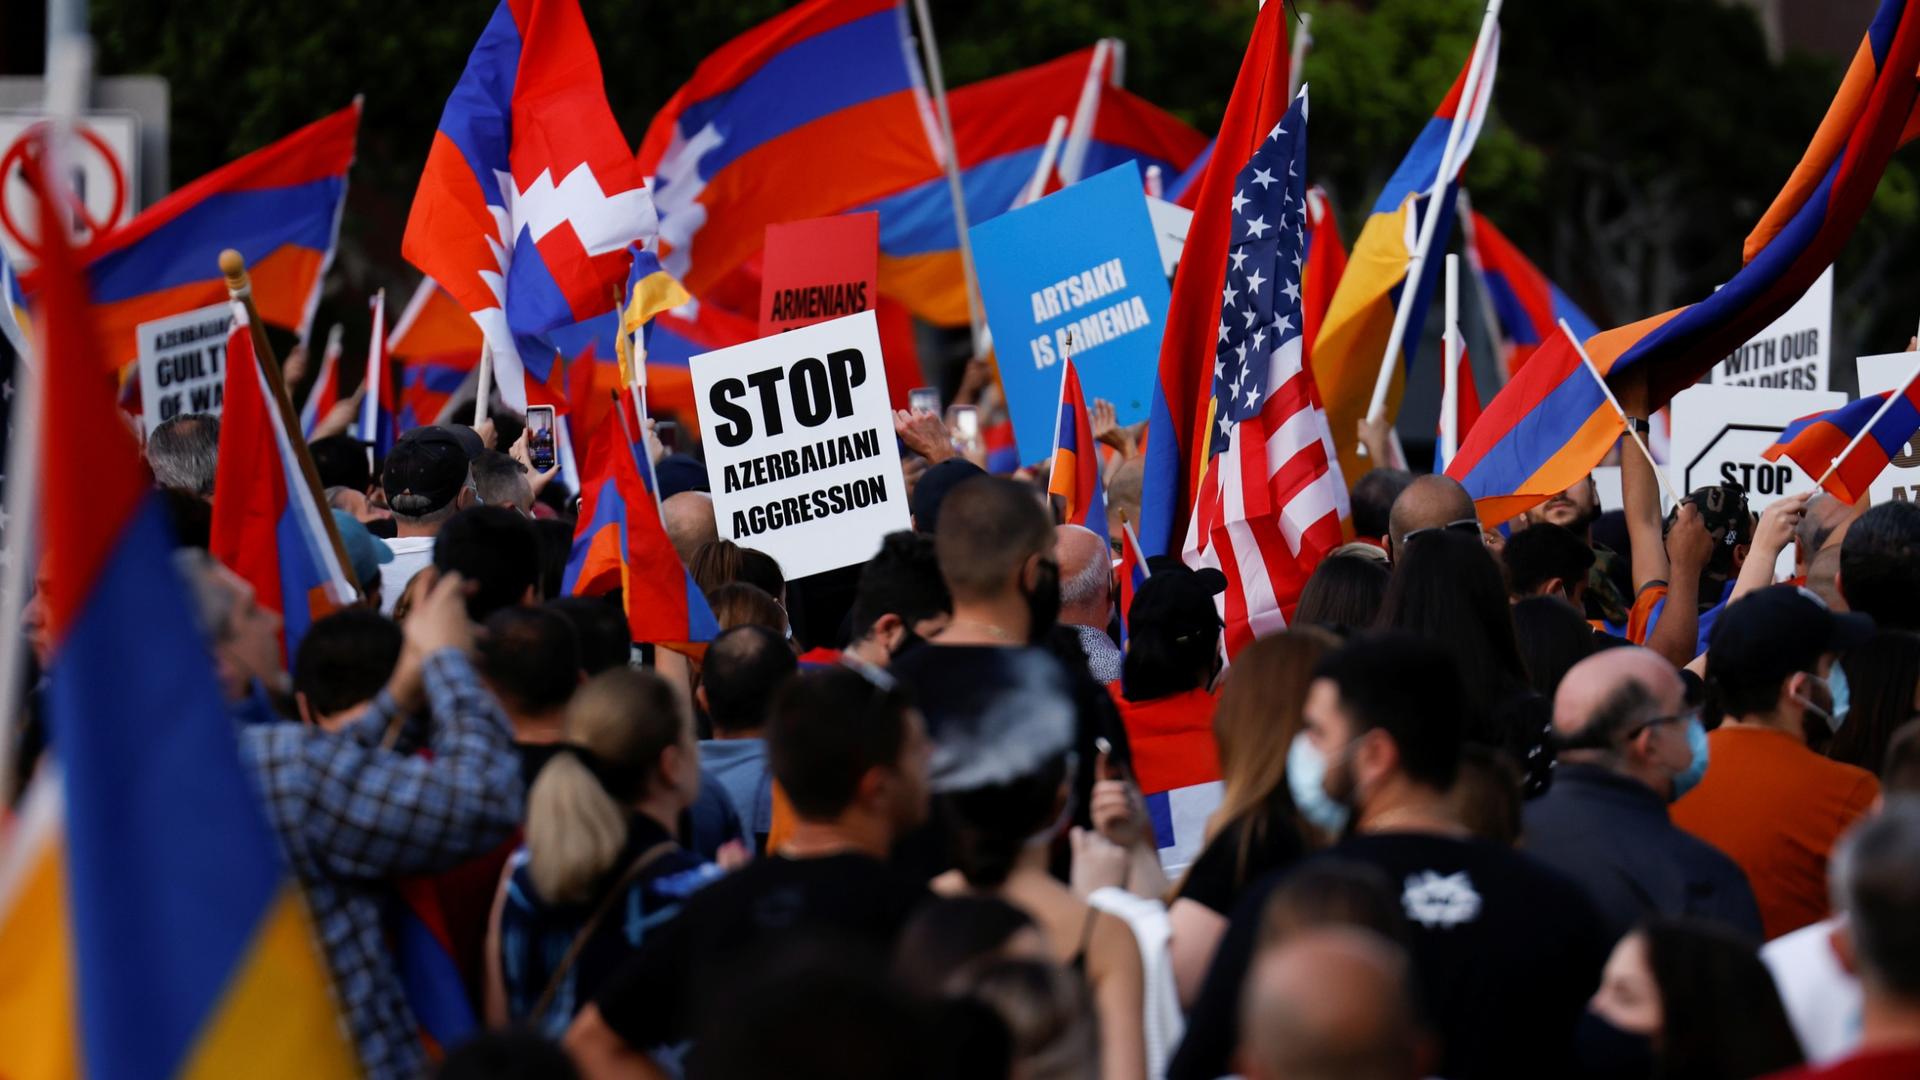 People take part in a protest by Armenian Youth Federation against what they refer to as Azerbaijan's aggression against Armenia and the breakaway Nagorno-Karabakh region, outside the Azerbaijani Consulate General in Los Angeles, Calif., Sept. 30, 2020.